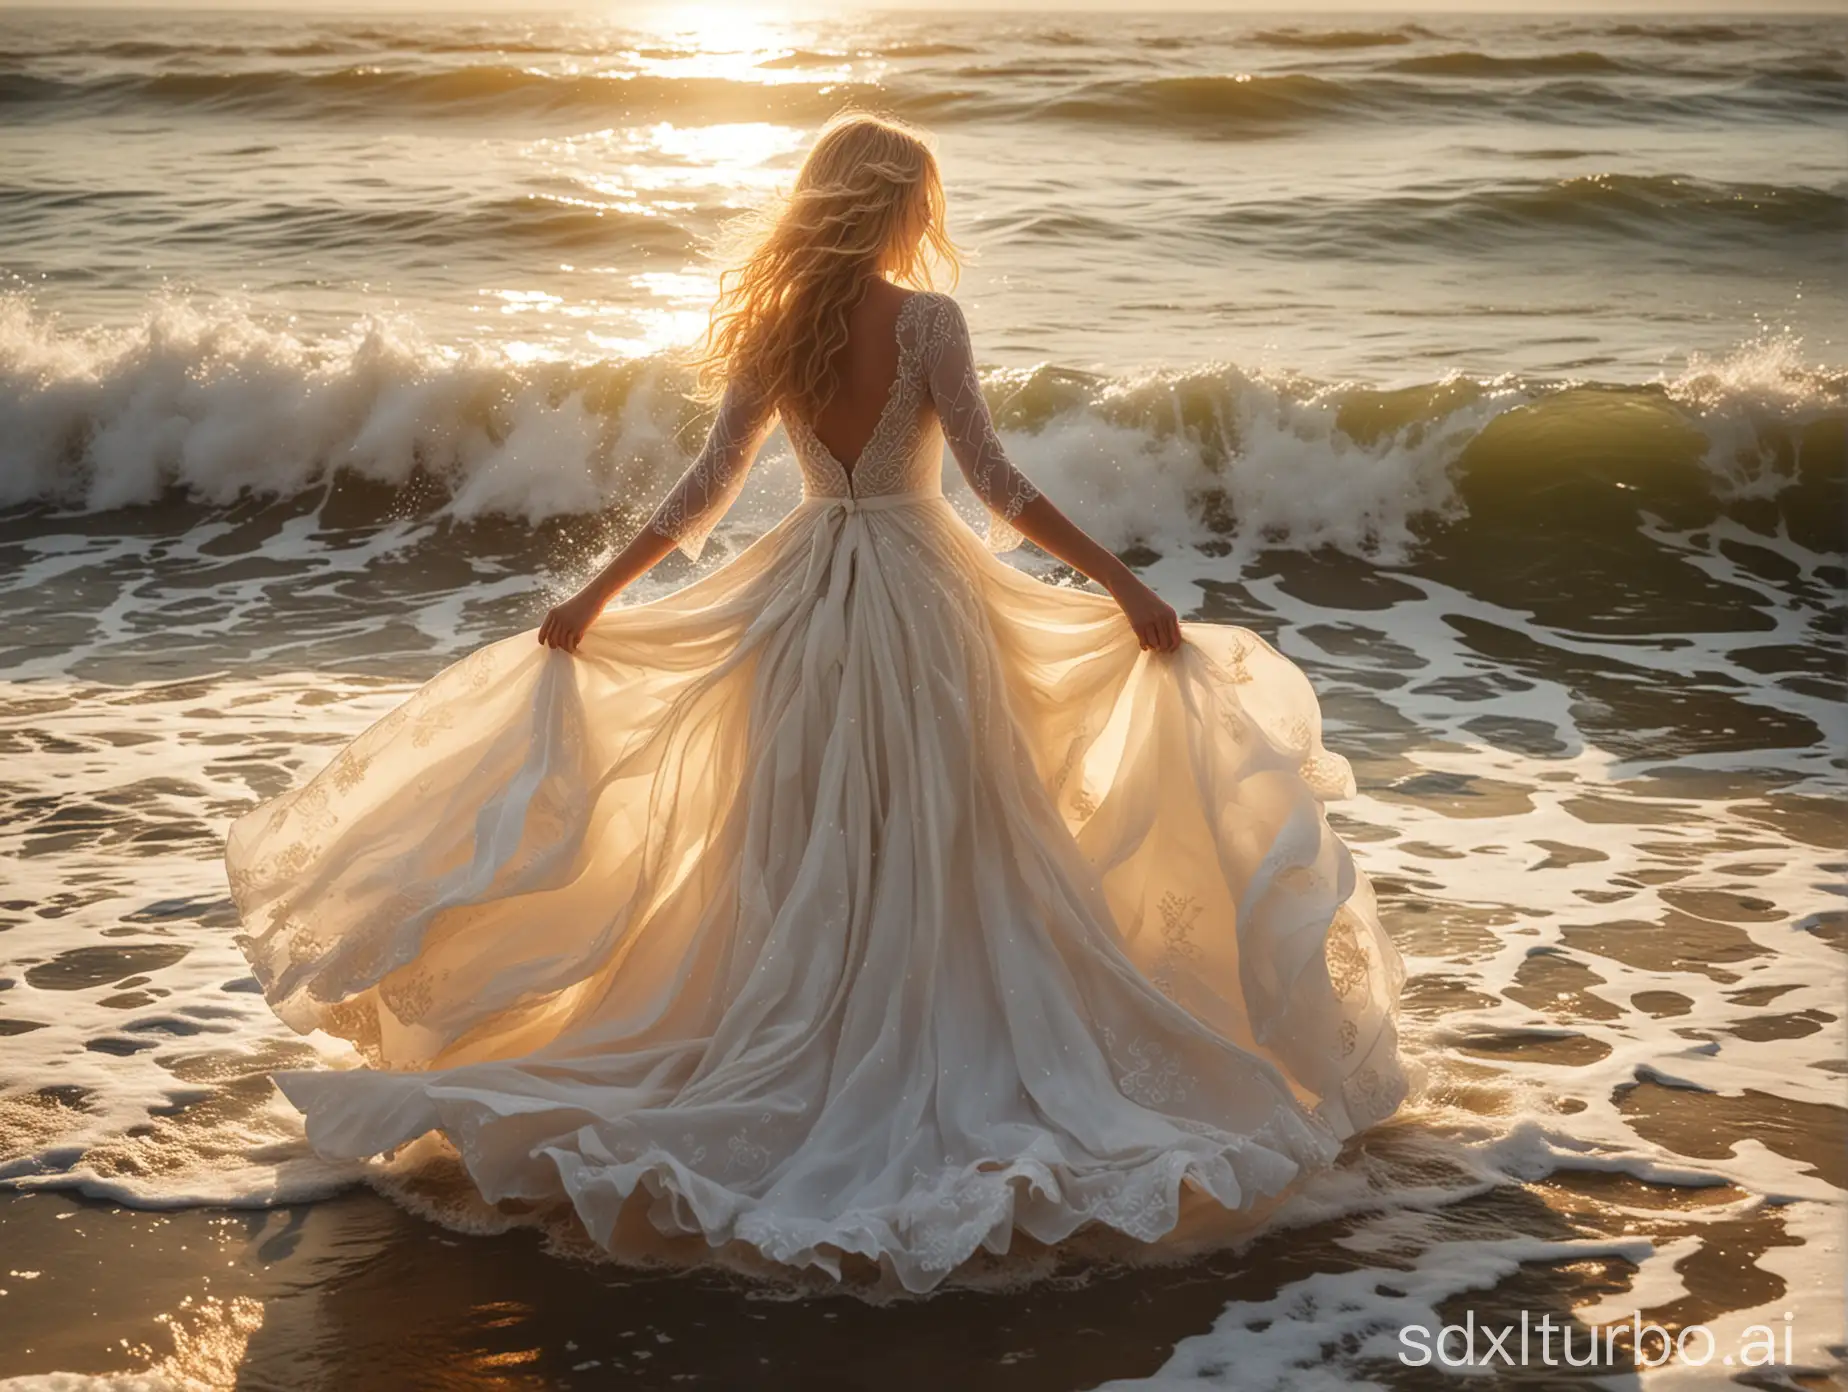 A captivating scene of a girl with cascading blonde hair, elegantly dressed in a radiant white gown, gracefully twirling amidst the mesmerizing waves of a tranquil sea. The golden sun casts its warm, ethereal light upon her, illuminating both her radiant beauty and the shimmering water, creating a surreal and enchanting atmosphere. The waves crash around her, their frothy crests brushing against her gown, while the sunlight dances upon the water's surface, reflecting a dazzling kaleidoscope of light.